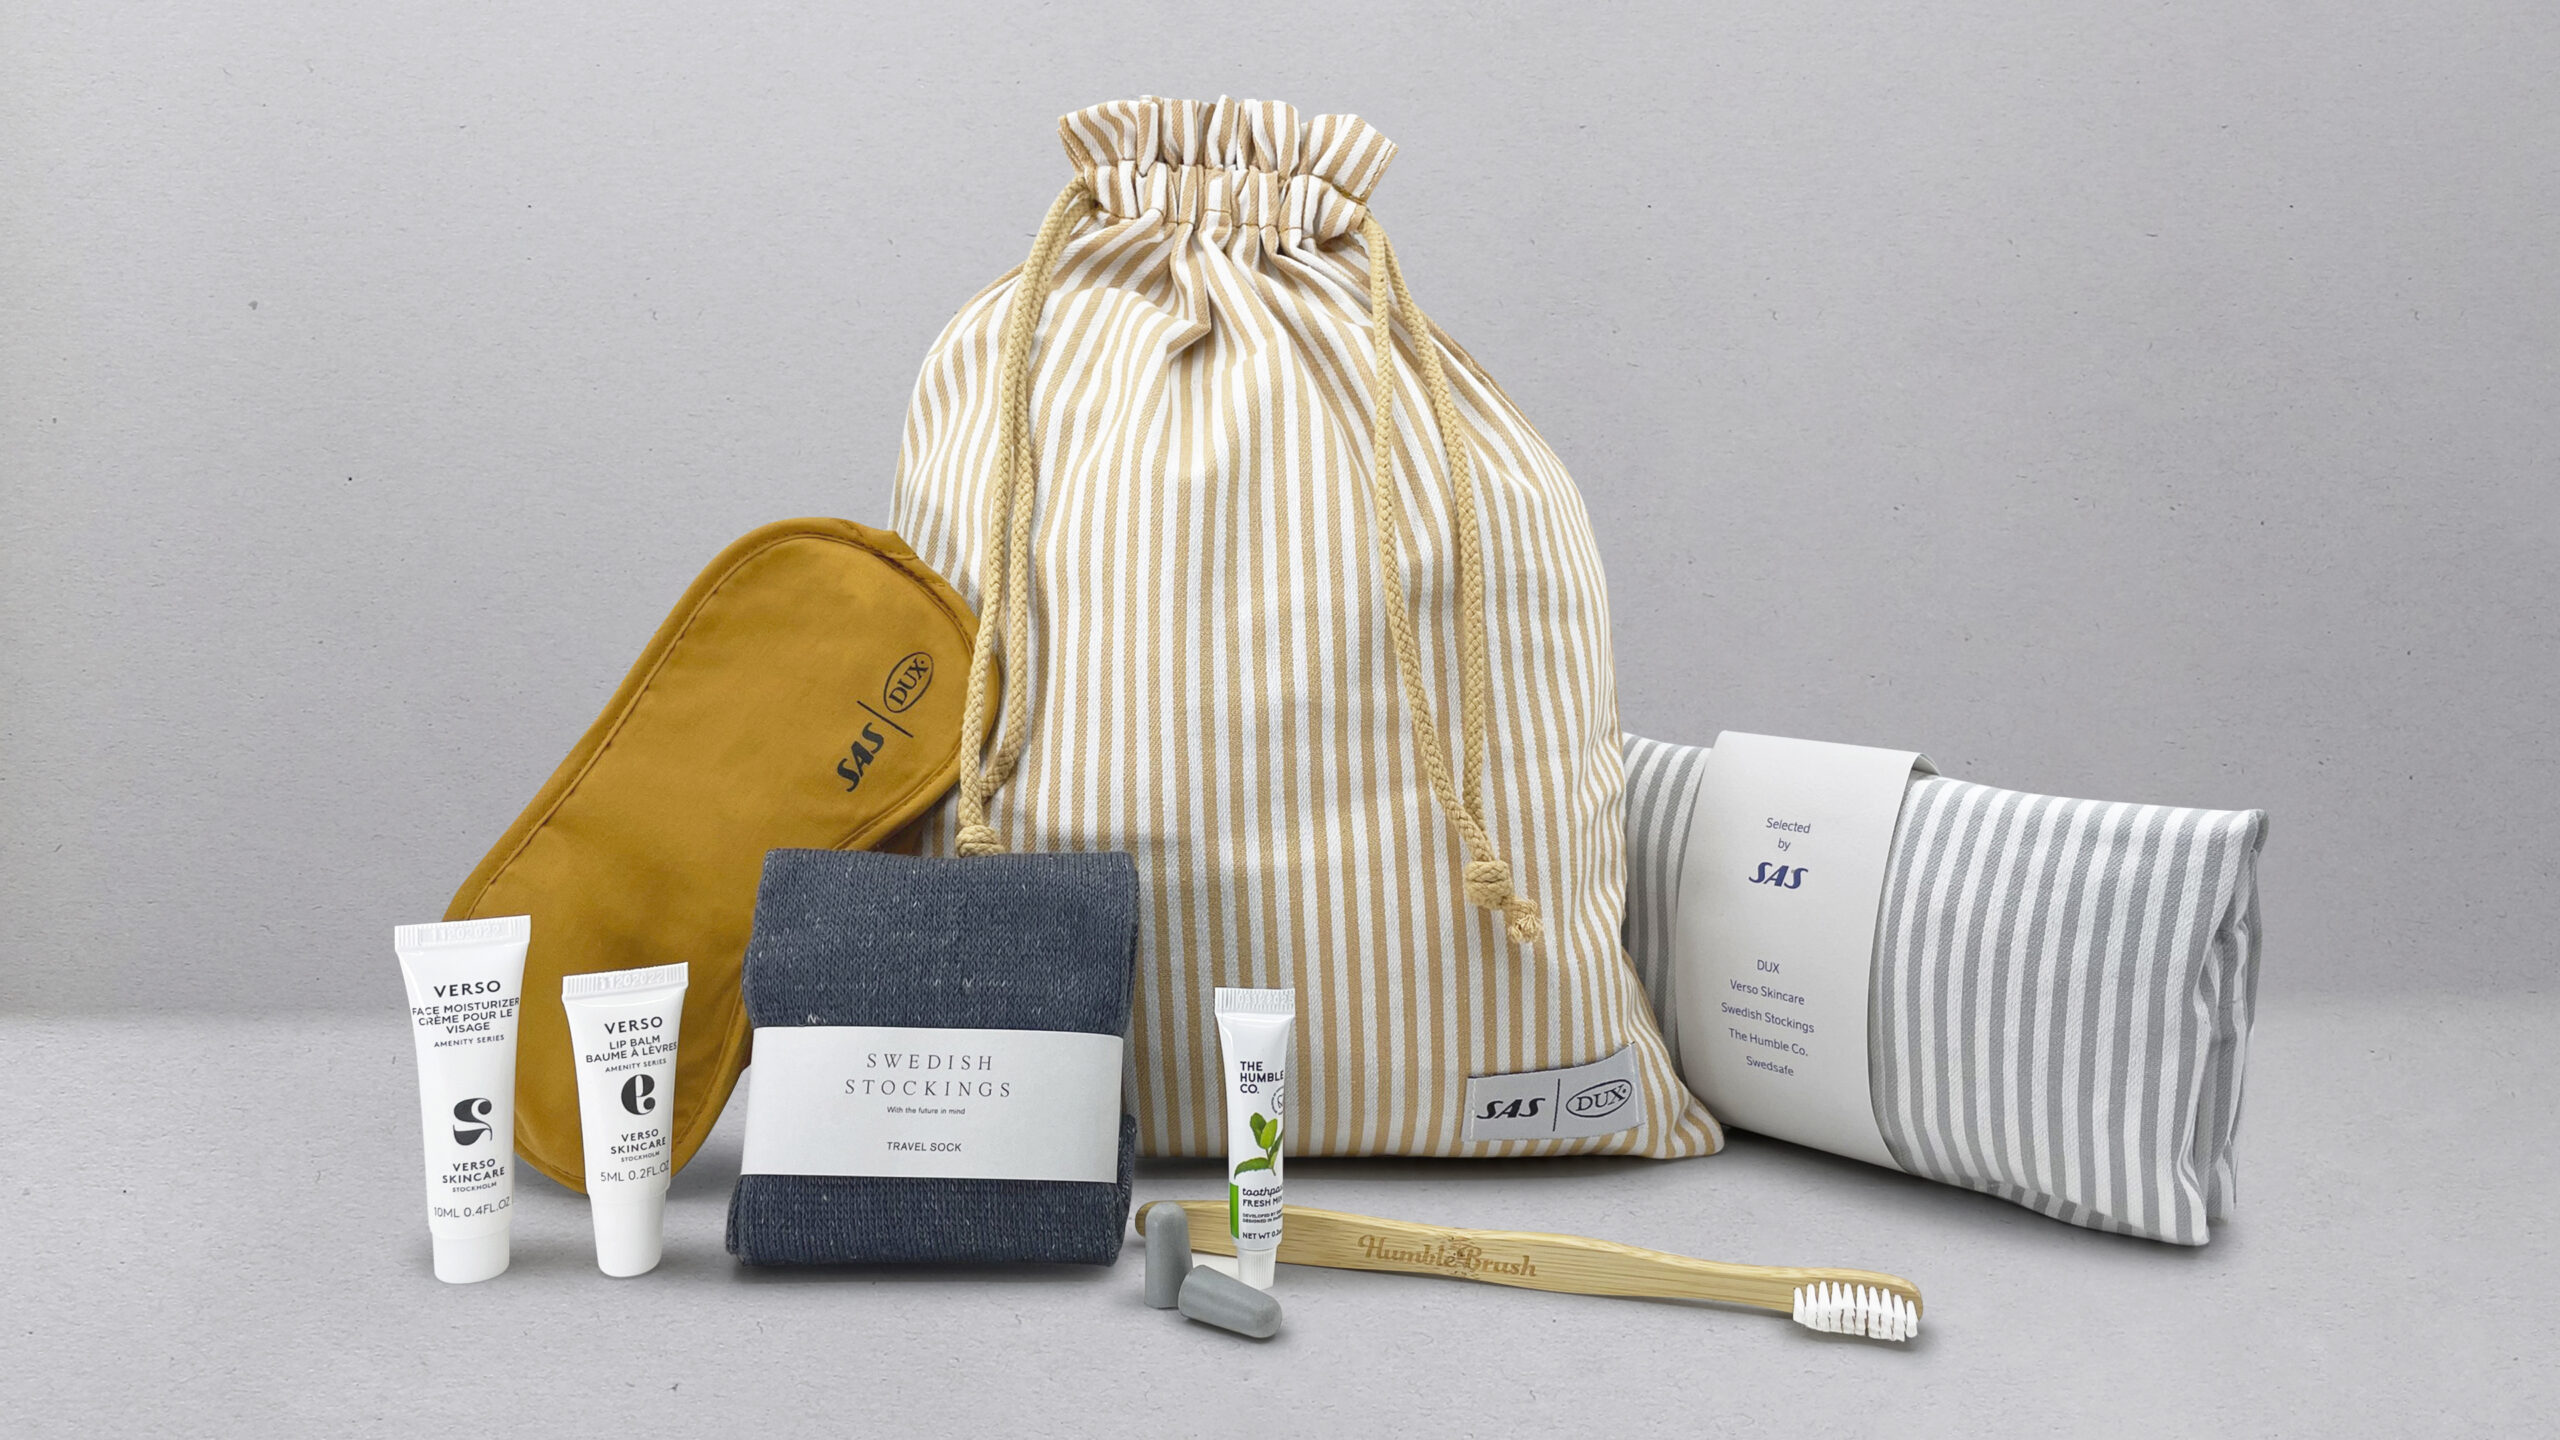 deSter created a special amenity kit for SAS airlines.